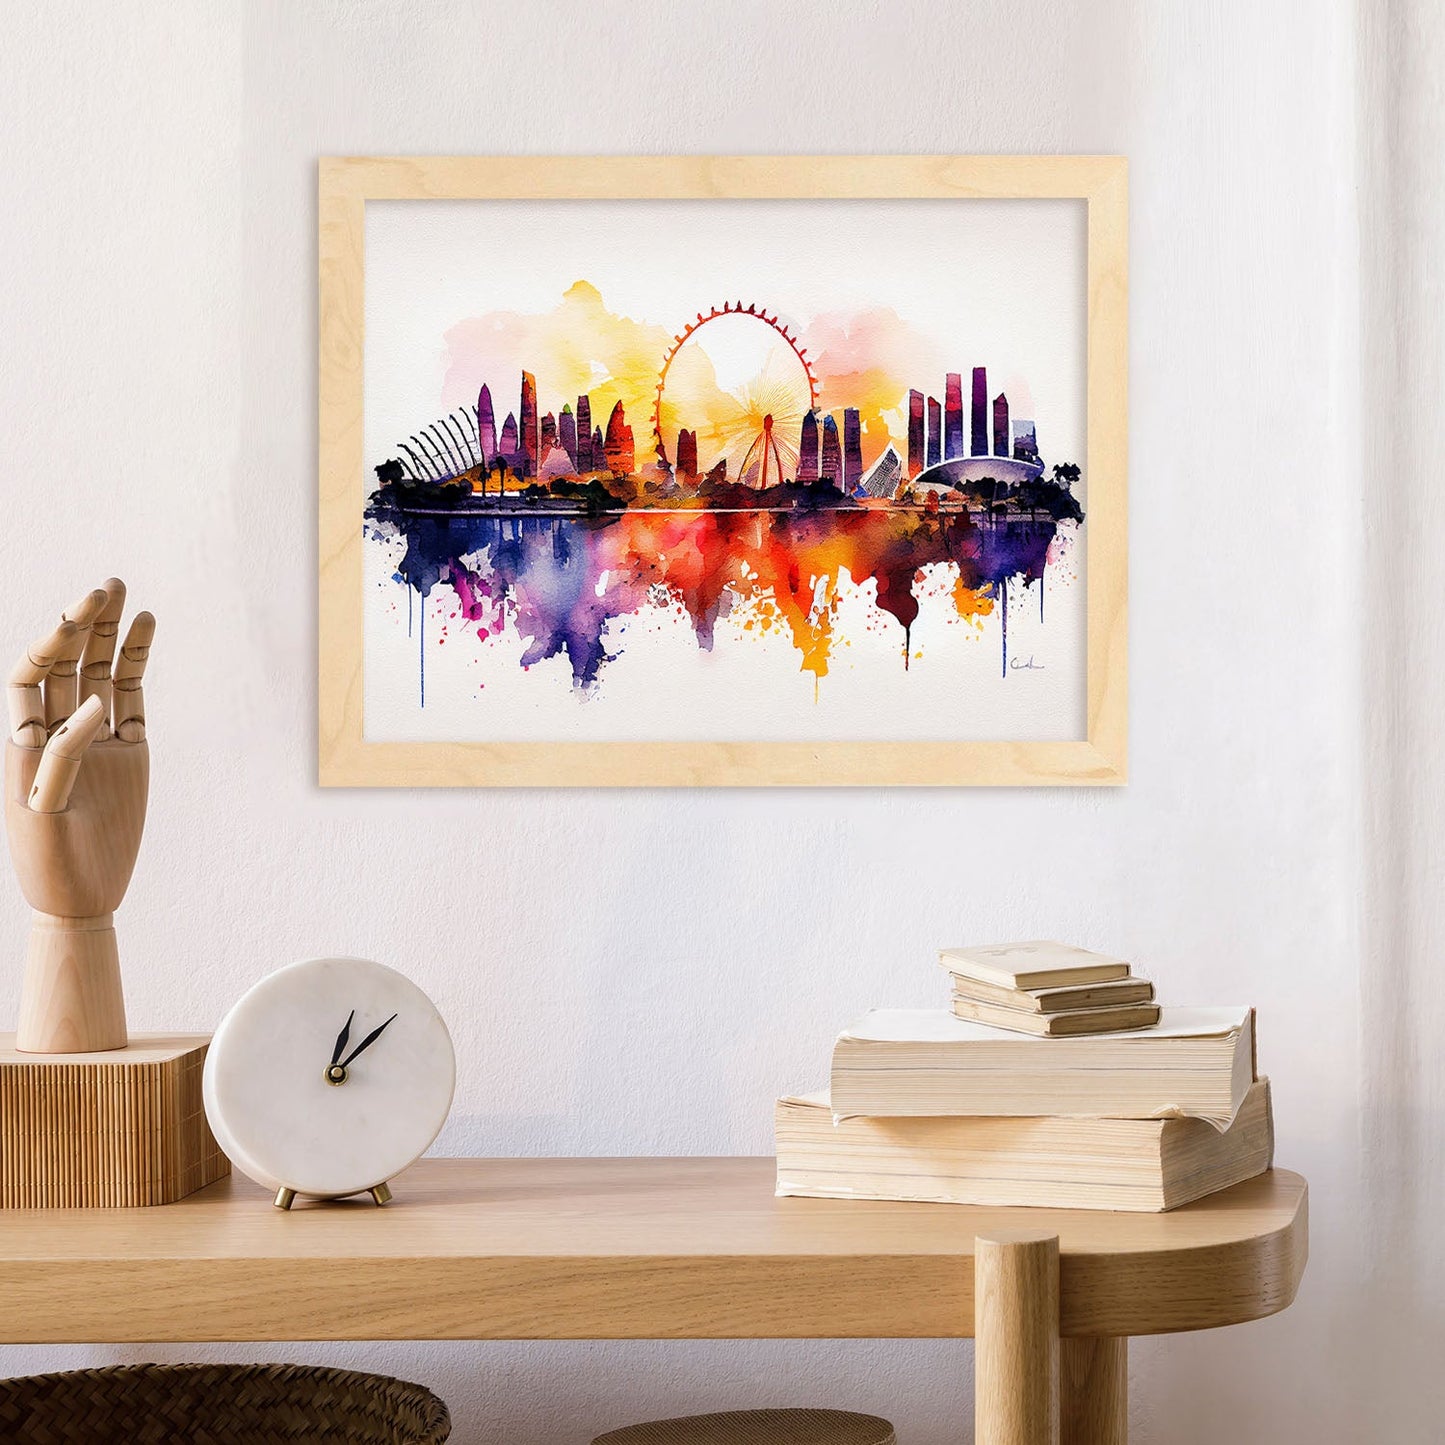 Nacnic watercolor of a skyline of the city of Singapore_3. Aesthetic Wall Art Prints for Bedroom or Living Room Design.